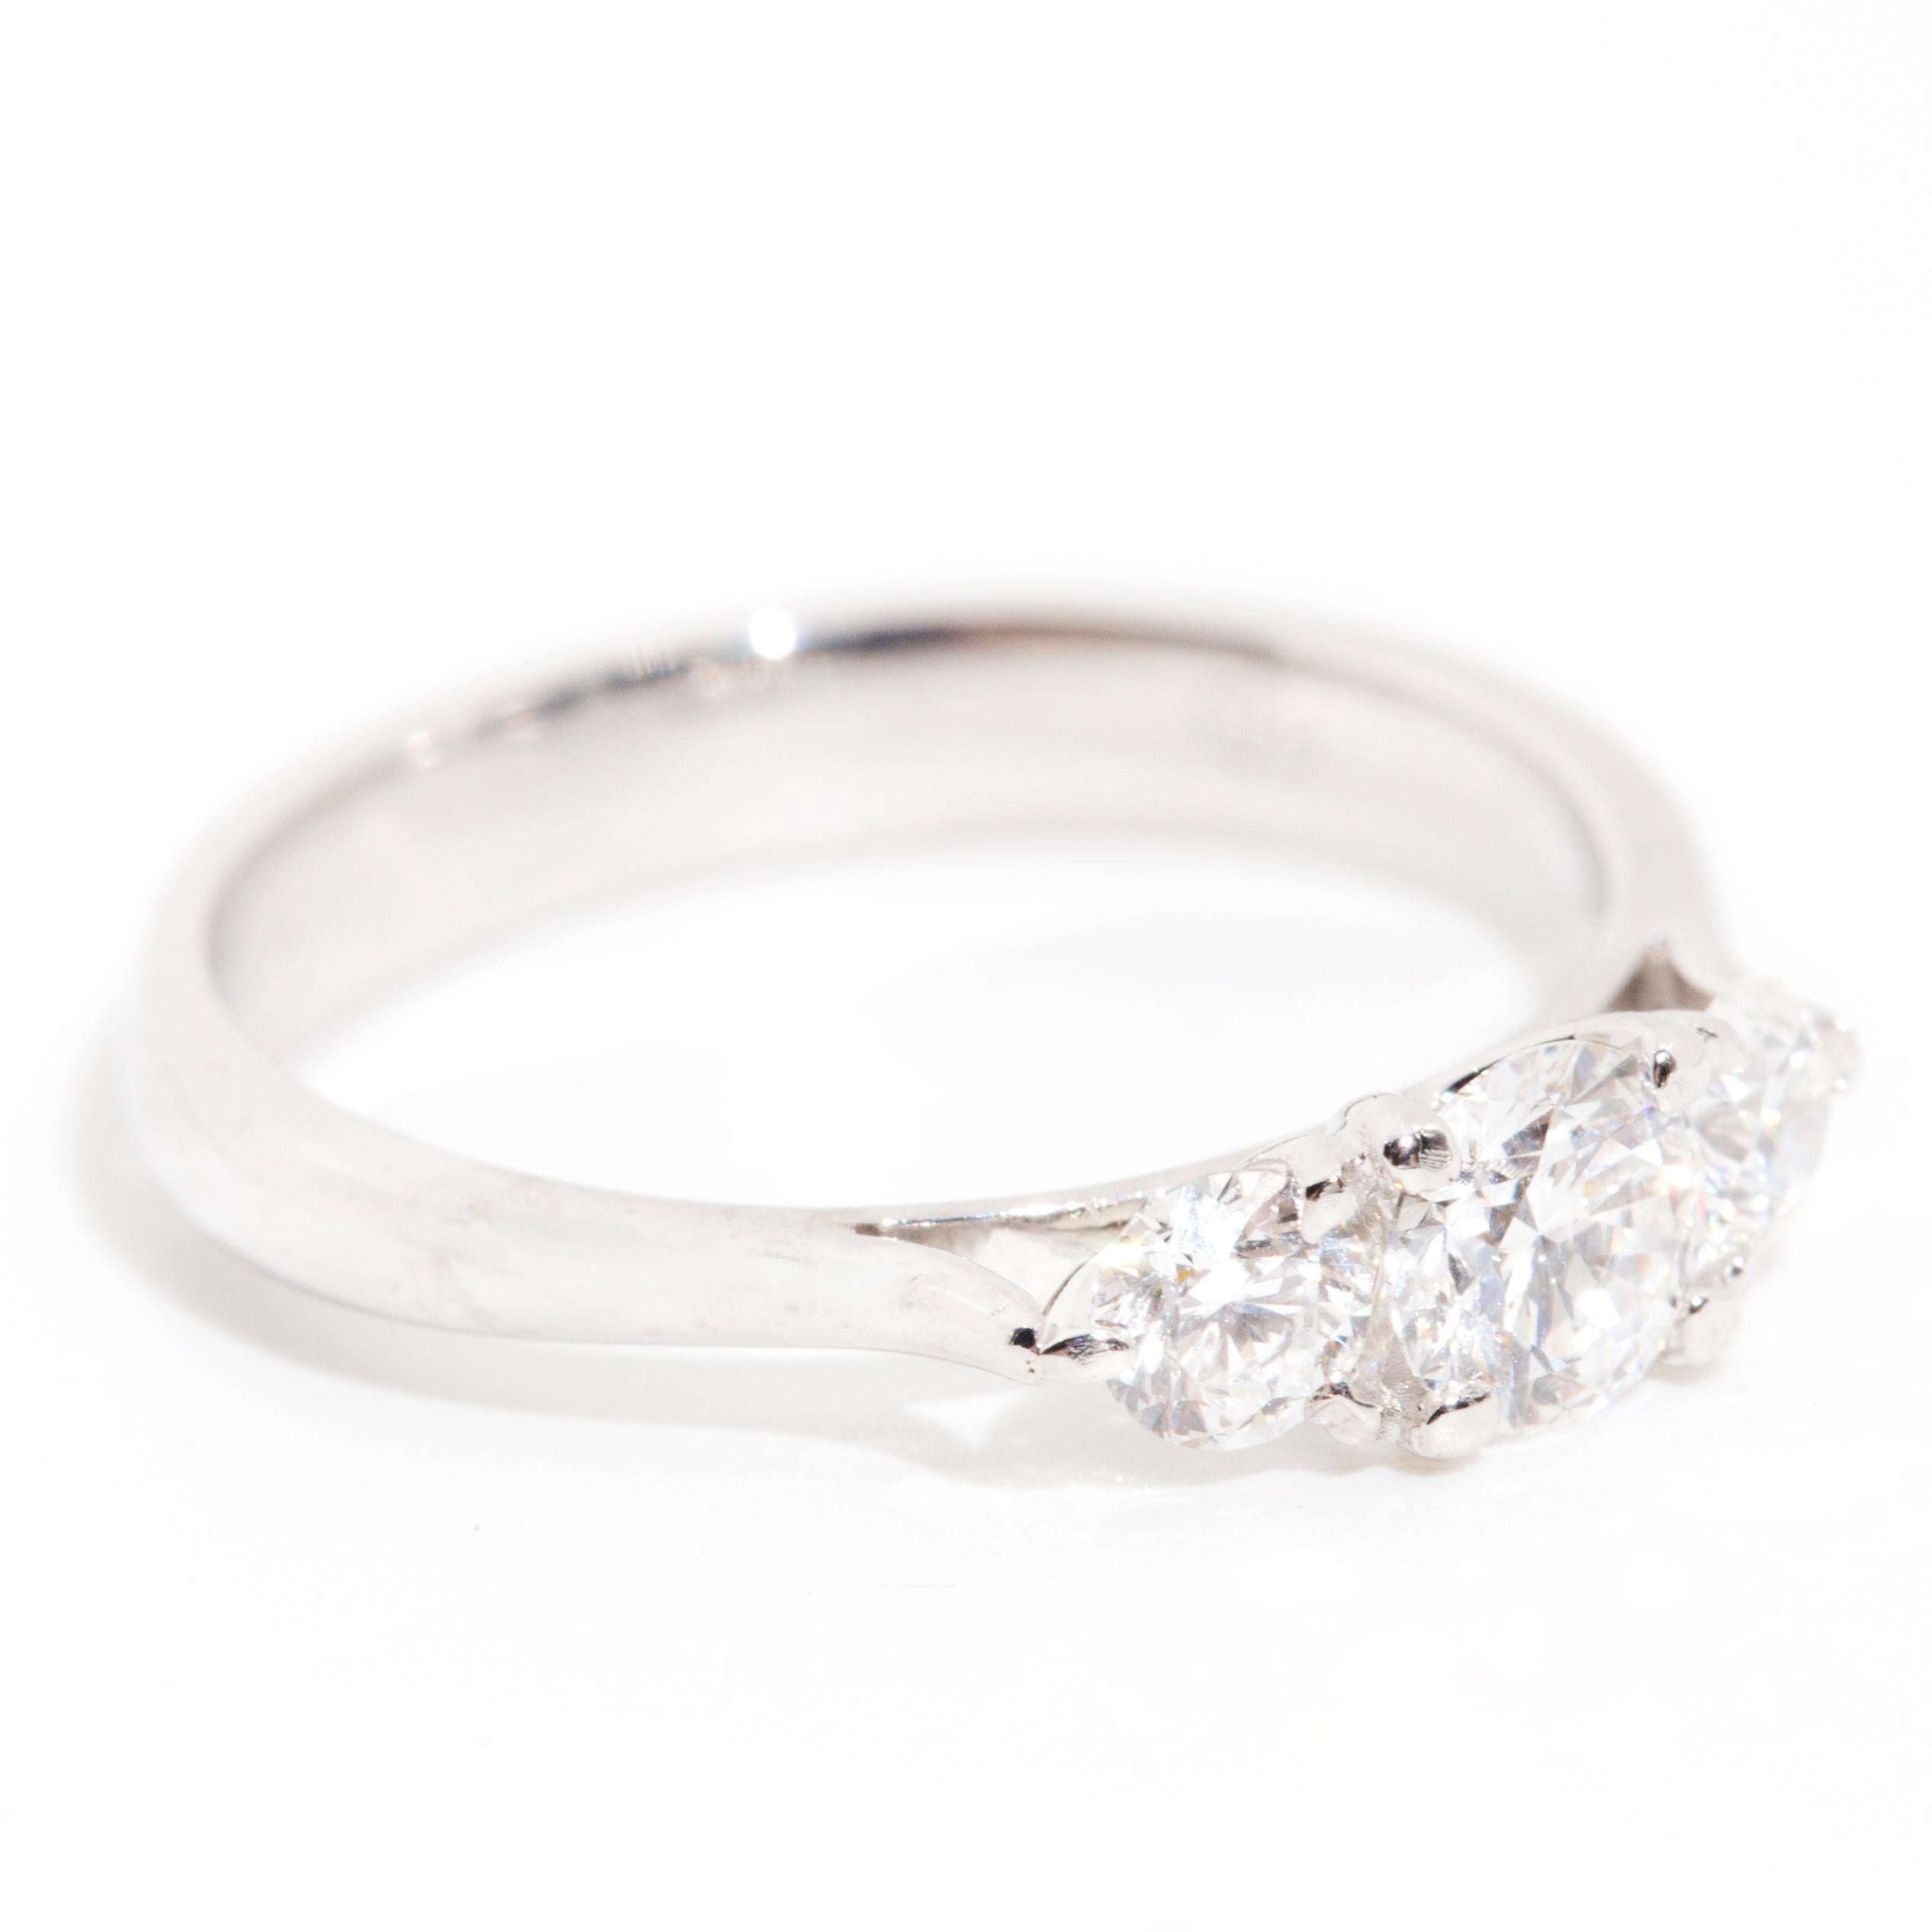 Forged in 18 carat white gold, this vintage three stone engagement ring features a stunning centrepiece 0.40 carat certified round brilliant cut diamond flanked by two alluring round brilliant diamonds. We have named this wondrous ring The Elsa